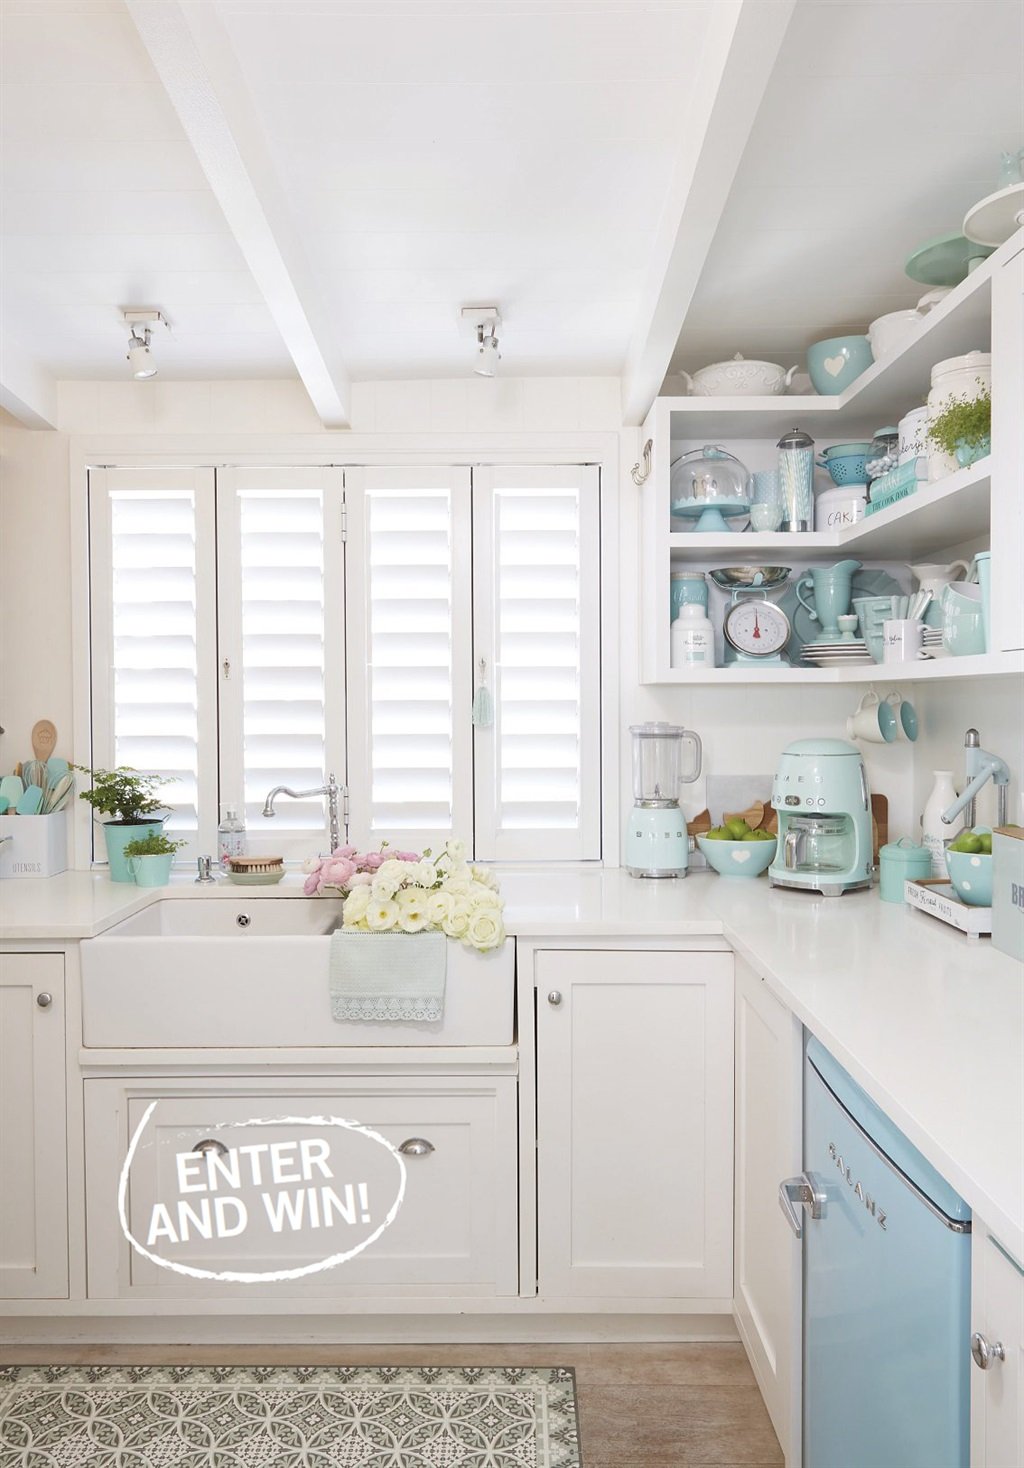 This lovely kitchen was entered by last year’s winner, Candice Nortje of Kommetjie. Her entire home was featured in our December 2020 | January 2021 issue.